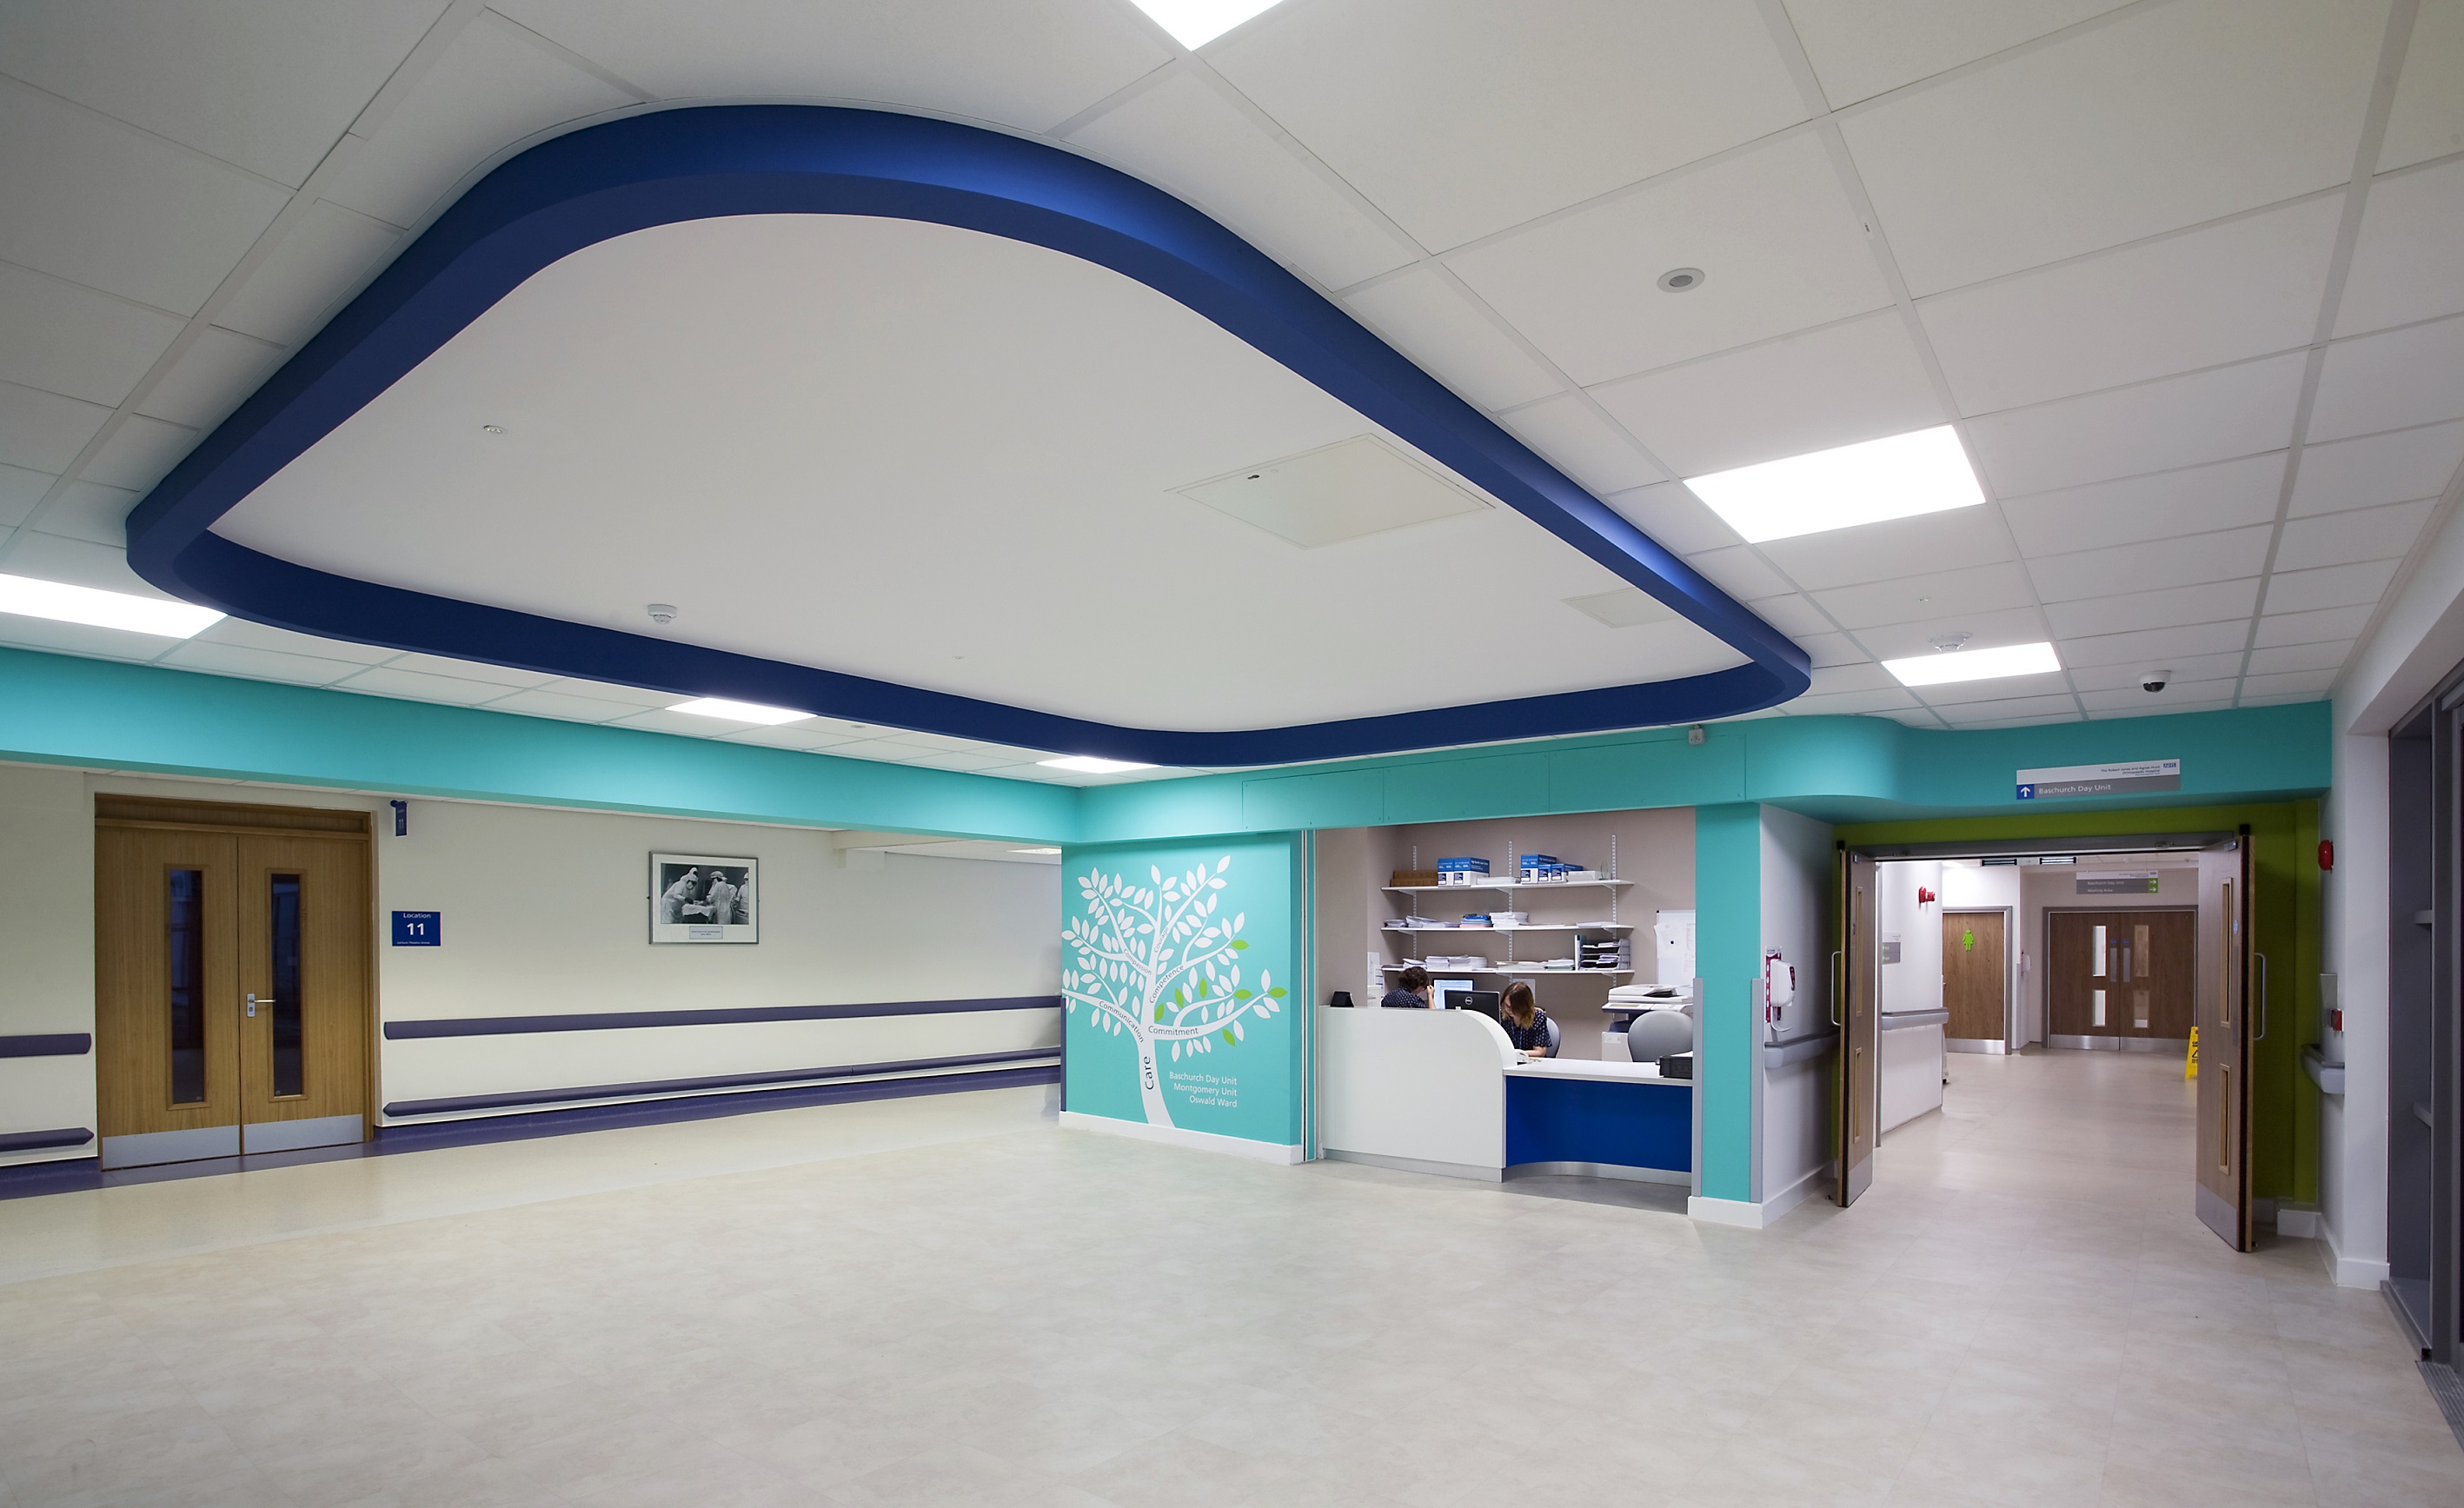 Lighting control systems reduce energy costs at Shropshire hospital